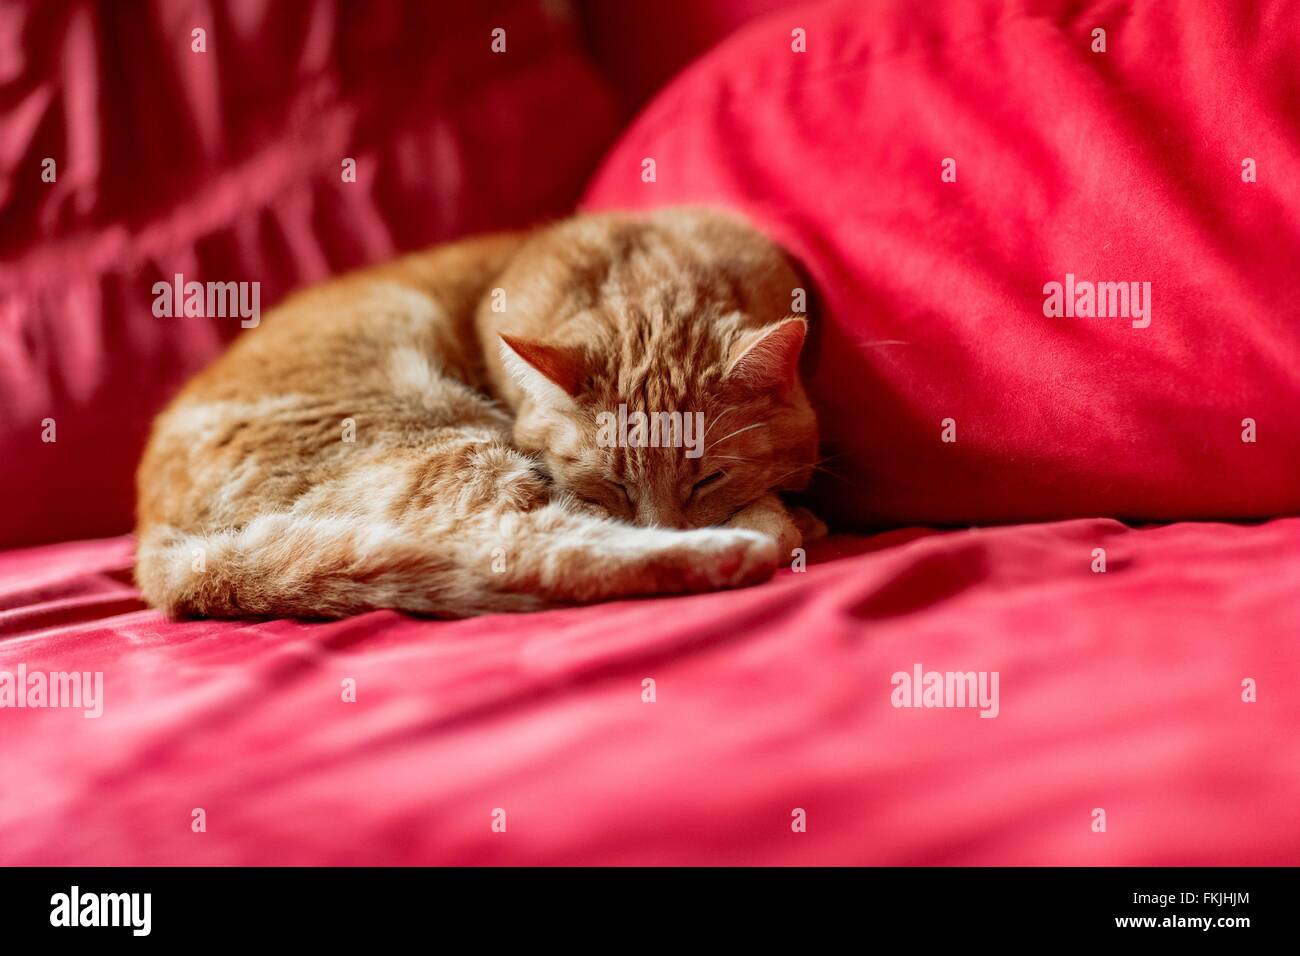 A cat sleeping on a red sofa Stock Photo